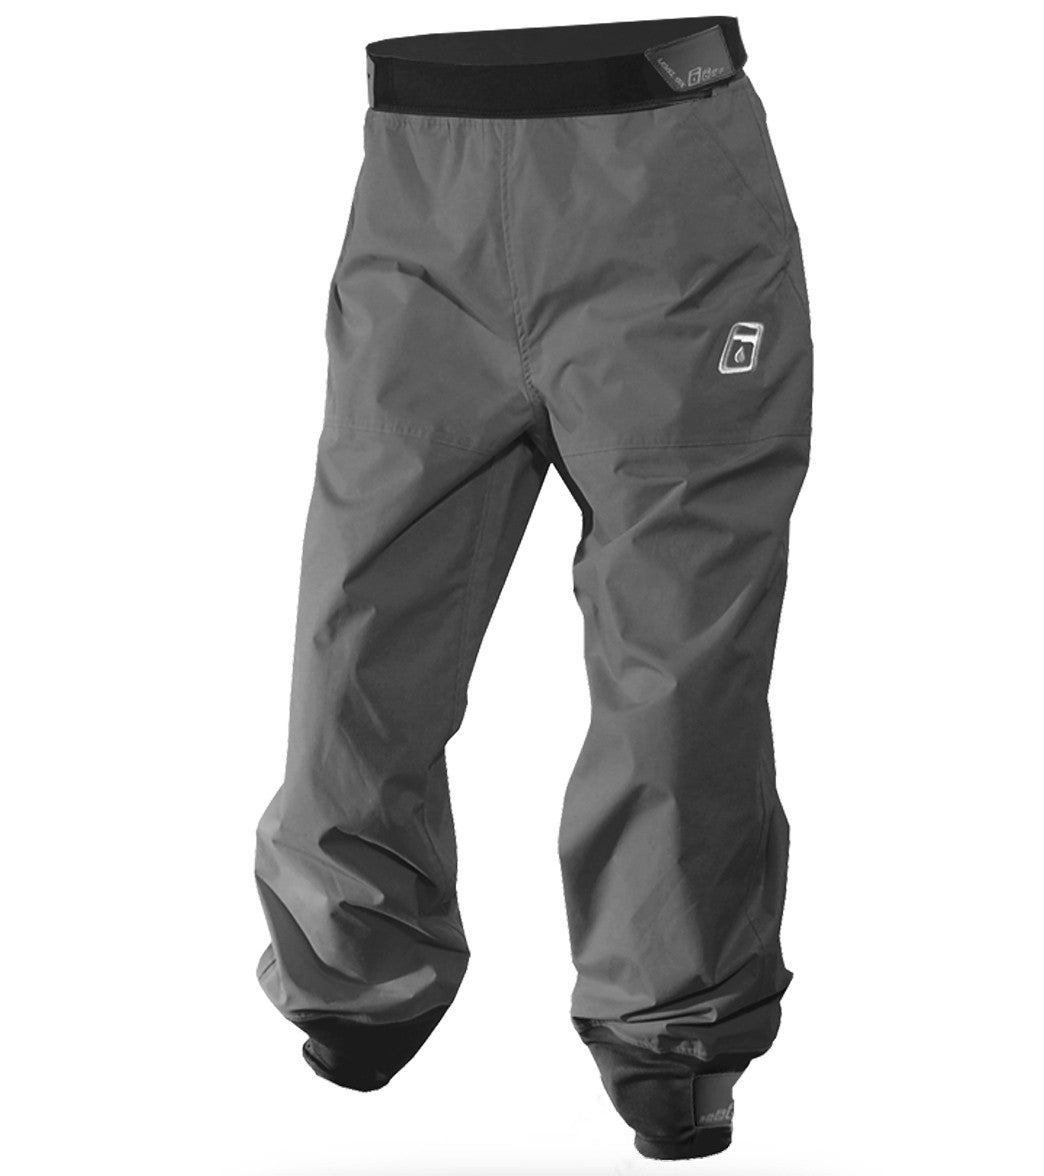 Level Six Men's Current 2.5 Ply Waterproof Breathable Paddle Pants - Charcoal X-Small - Swimoutlet.com